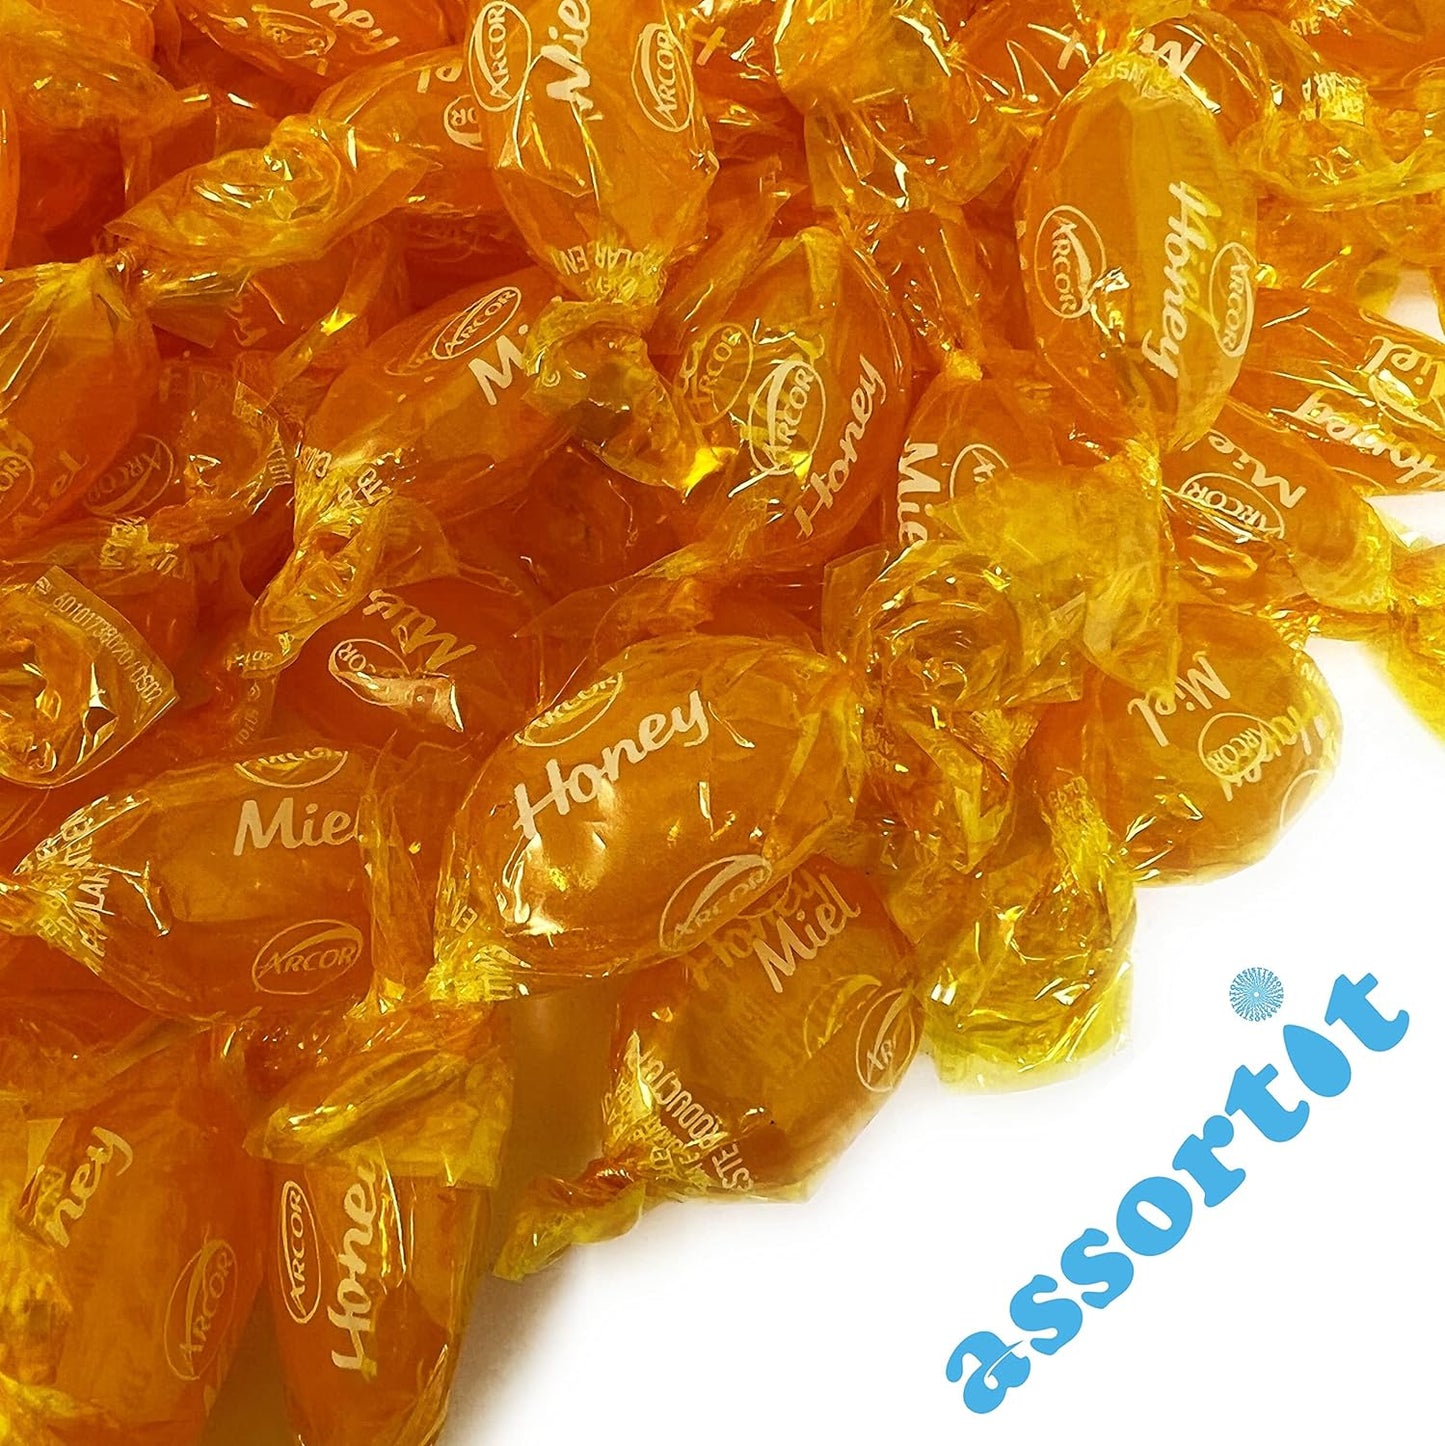 Arcor Honey Filled Hard Candy - 10 lbs Honey Flavored Classic Filled With Real Honey 160 oz.